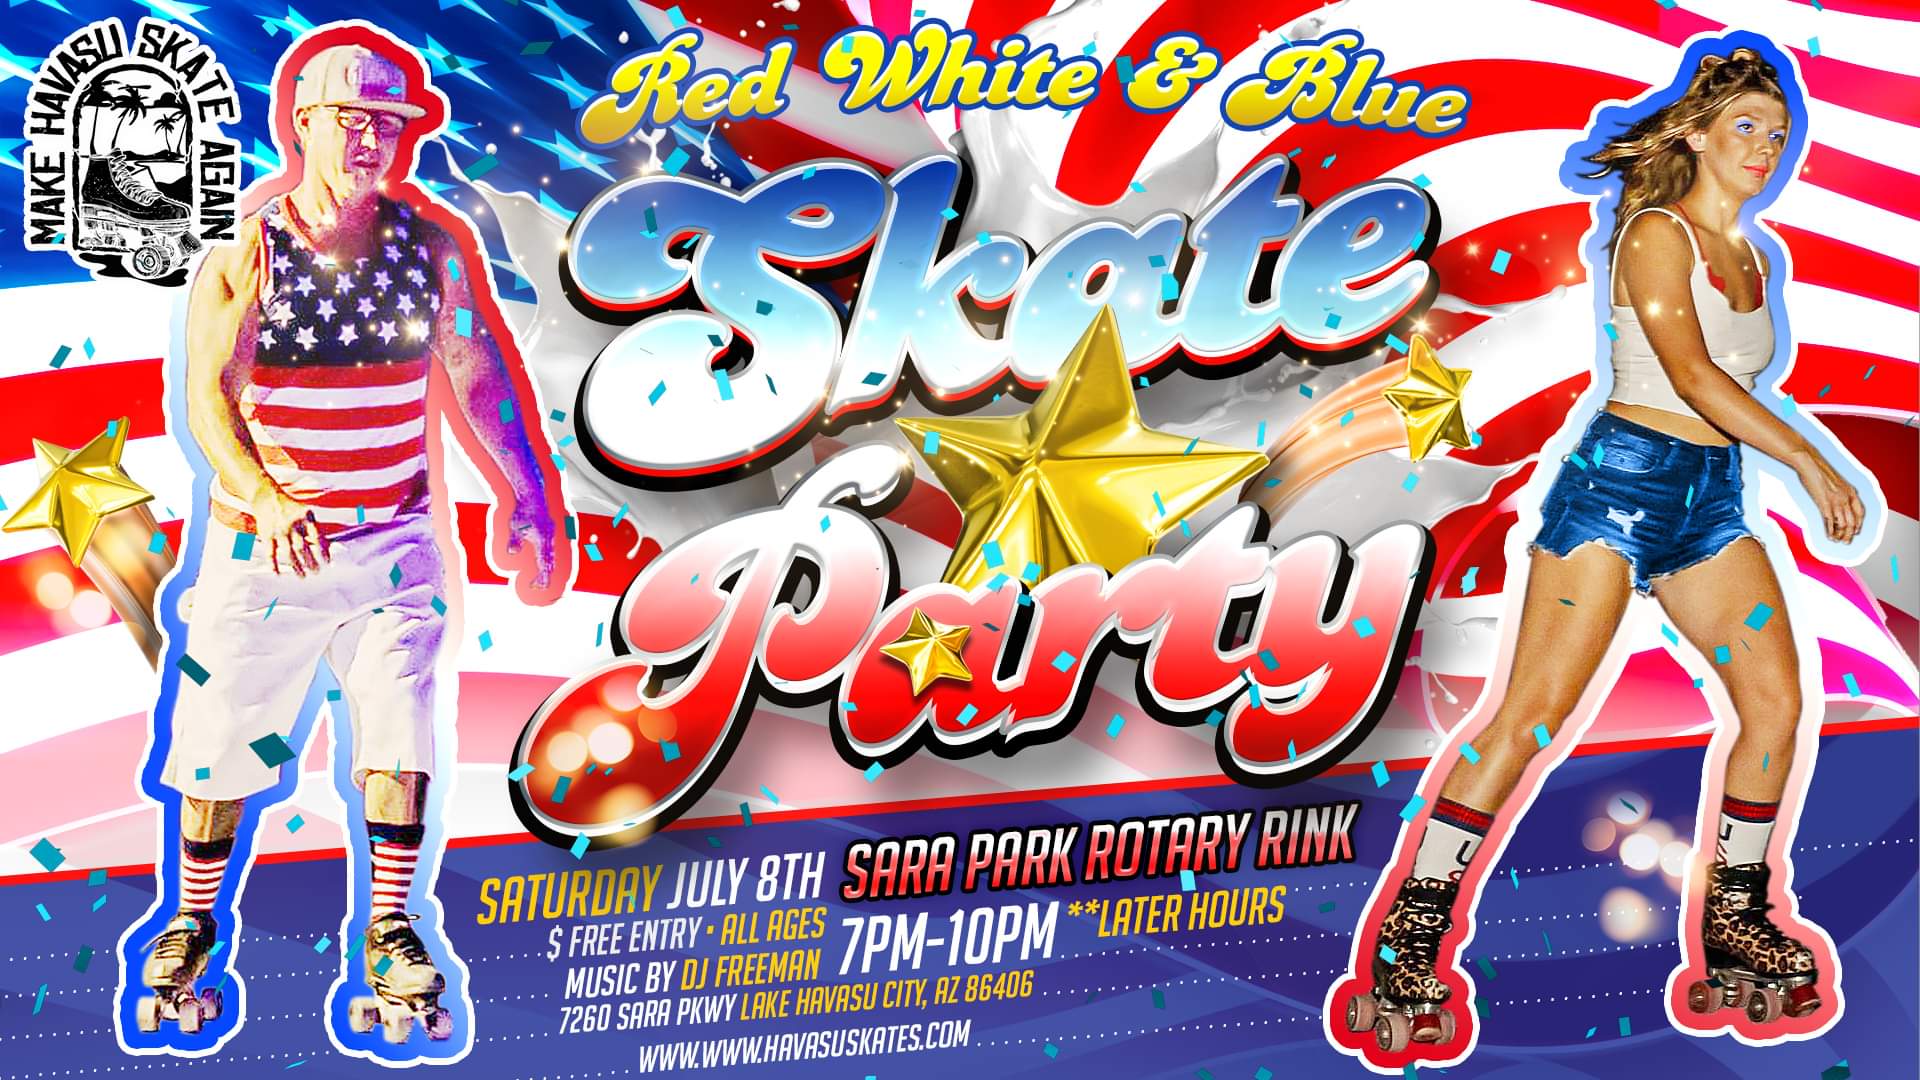 Red, White & Blue Skate Party